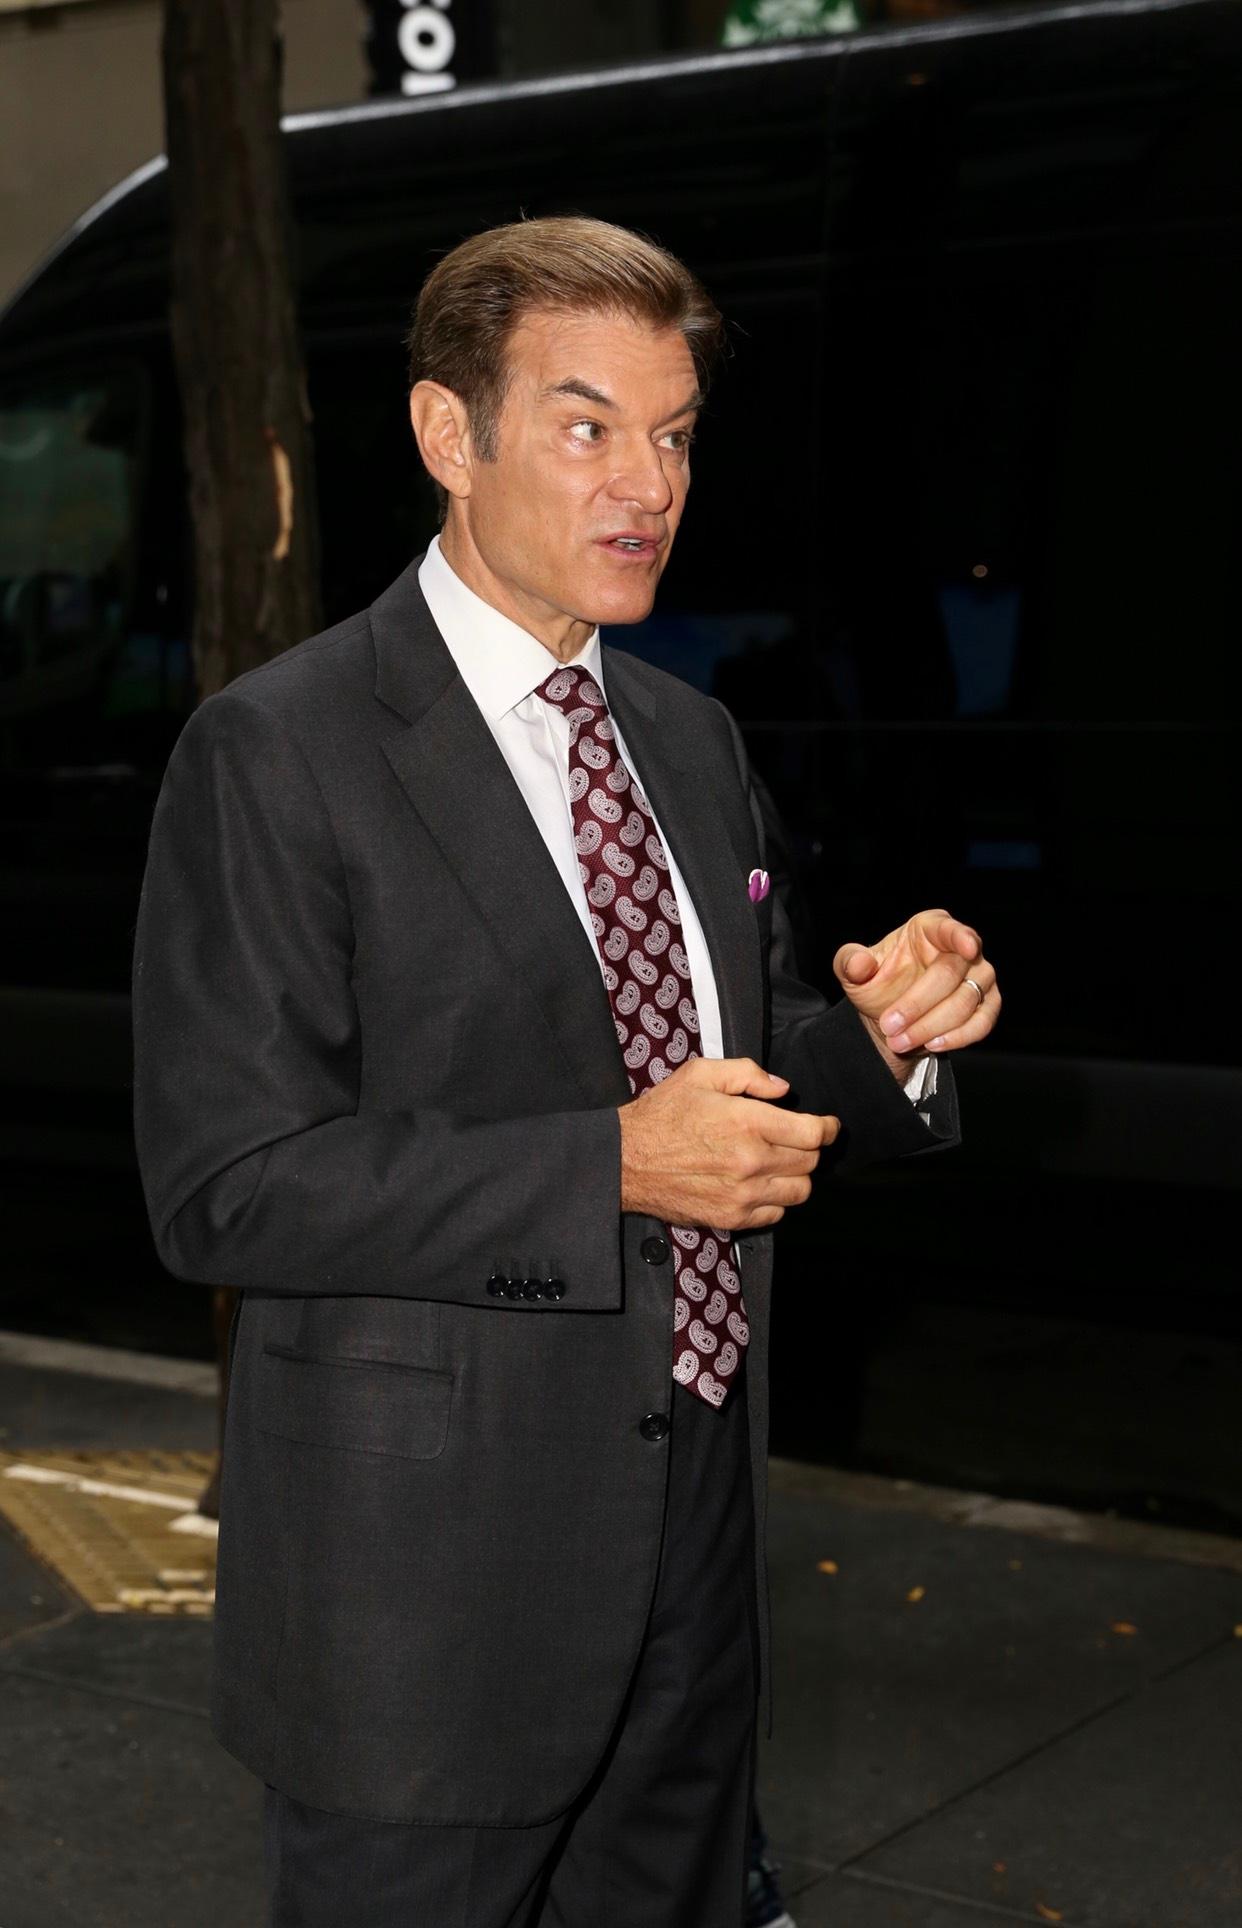 Dr. Oz Saves A Man's Life After He Collapsed During A Political Event